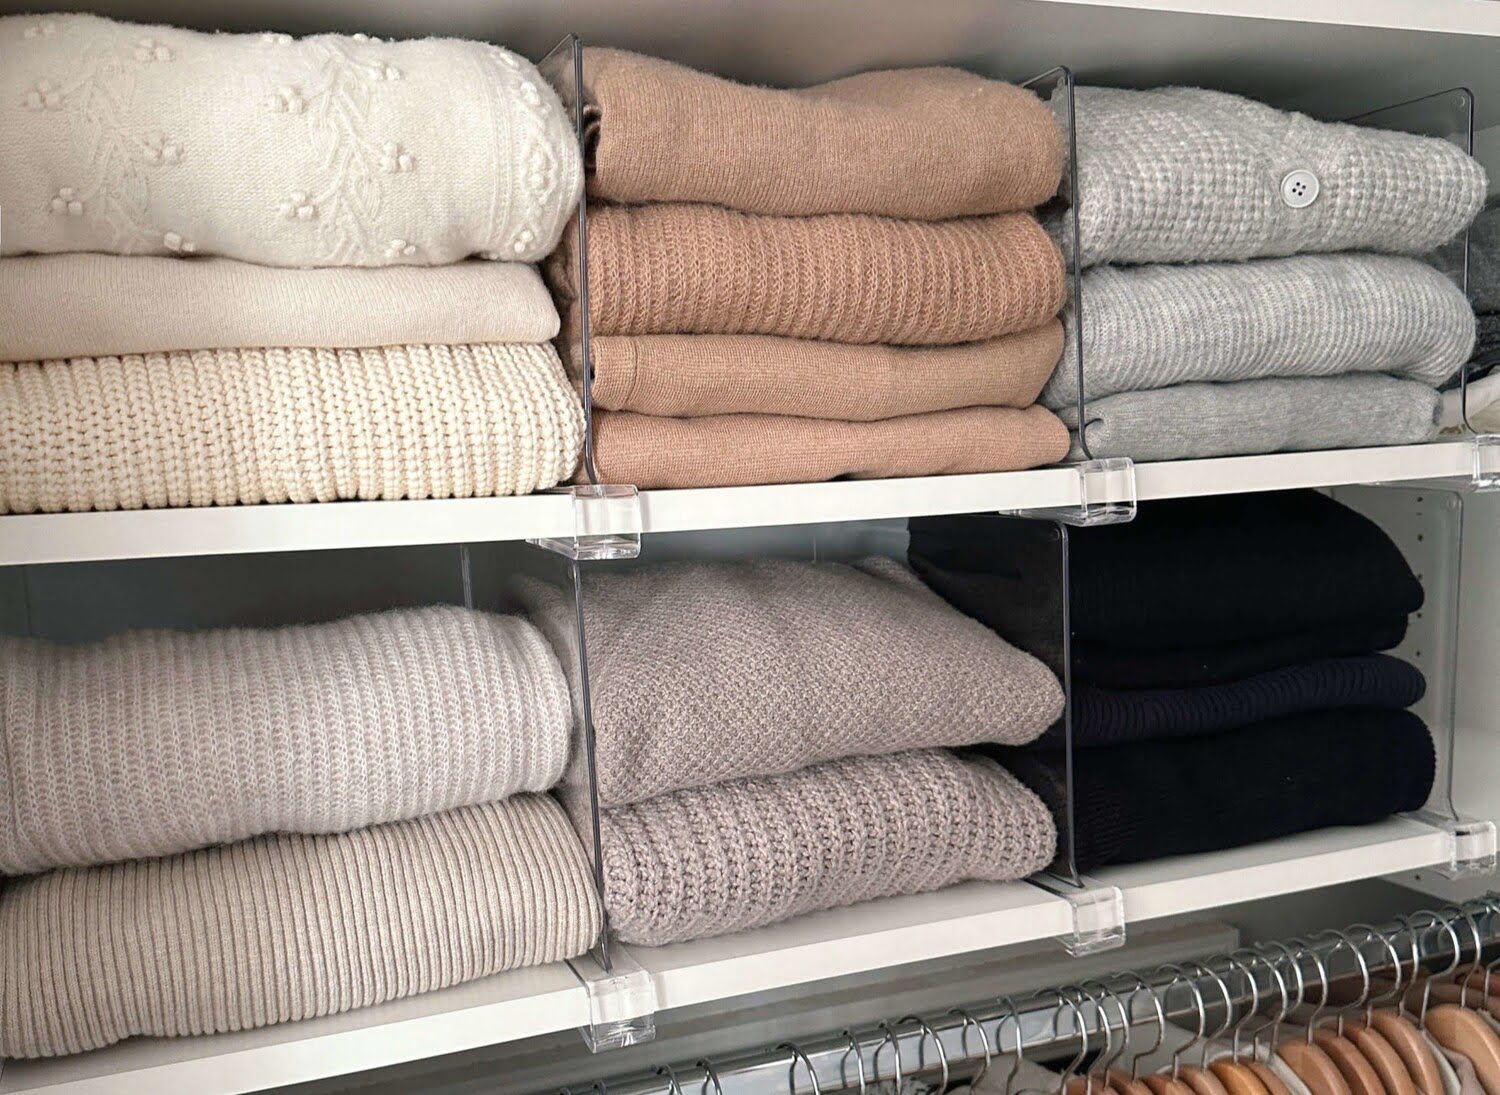 Closet Organizer and Storage for Sweaters, Towels, Hoodies, Sheets